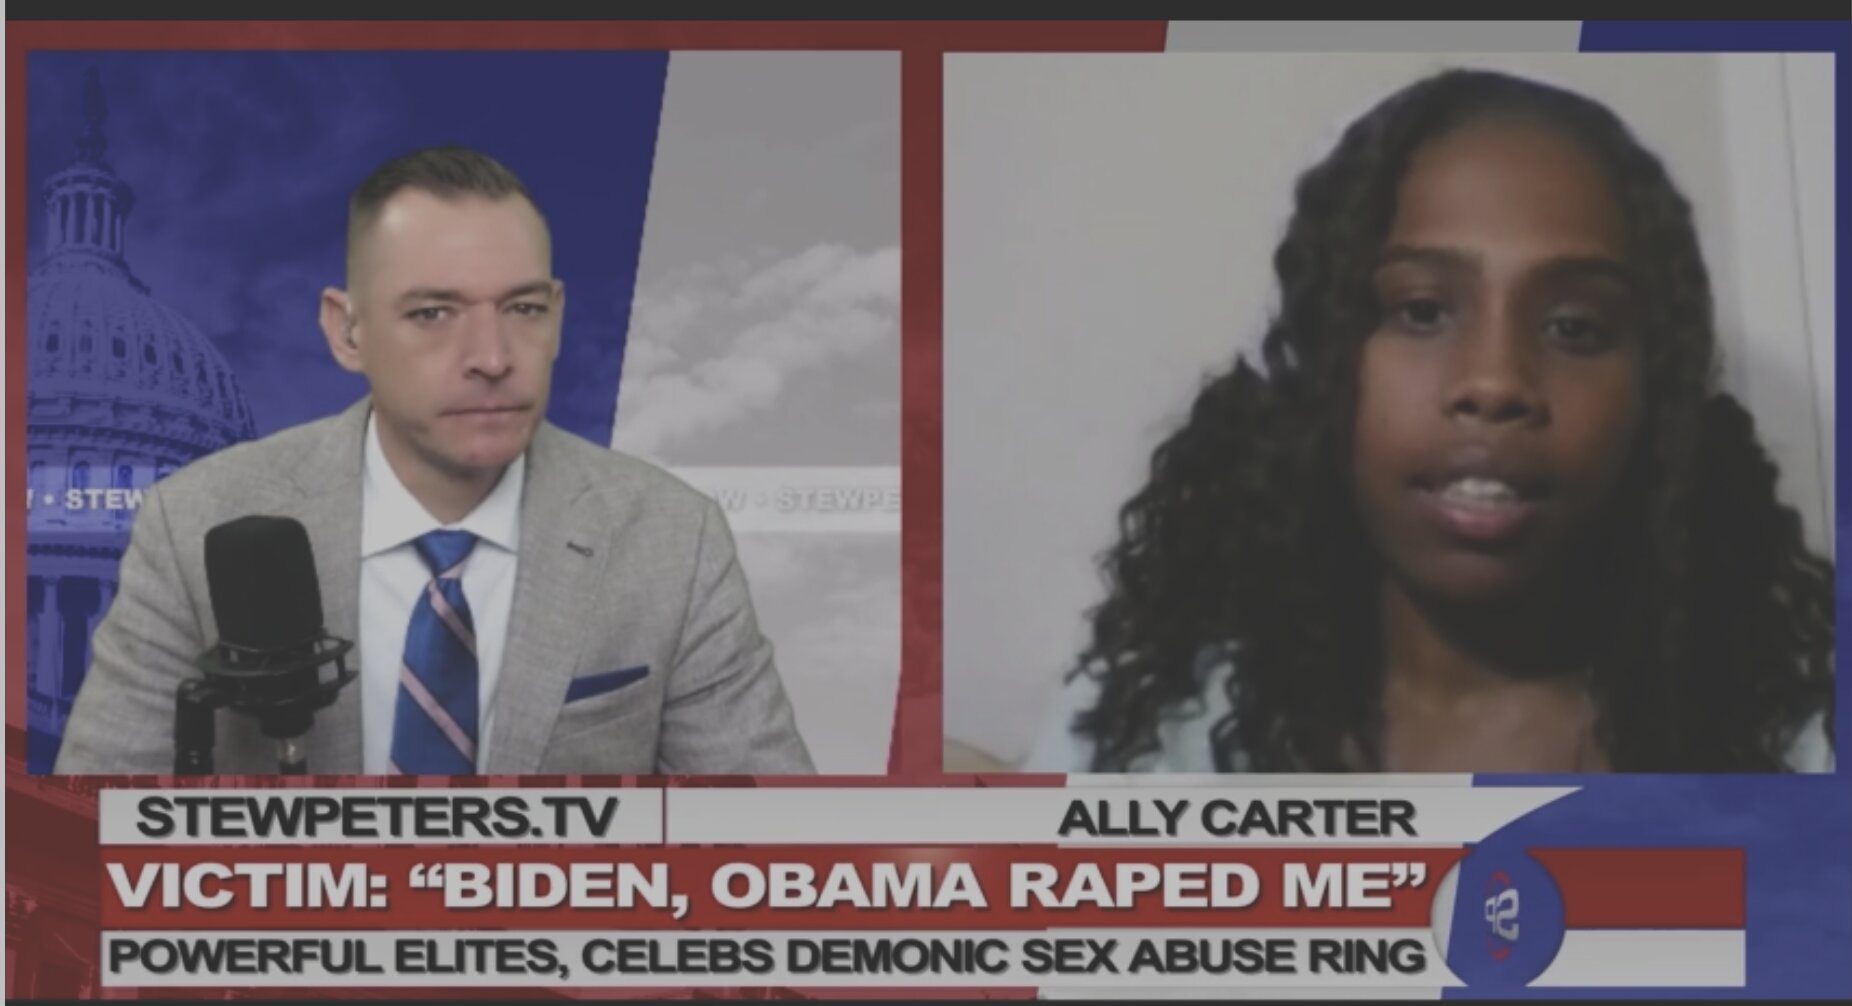 Ally Carter on Stew Peters: “Biden and Obama Raped Me”: Powerful Elites, Celebs, Demonic Sex Abuse Ring Wednesday, November 10, 2021